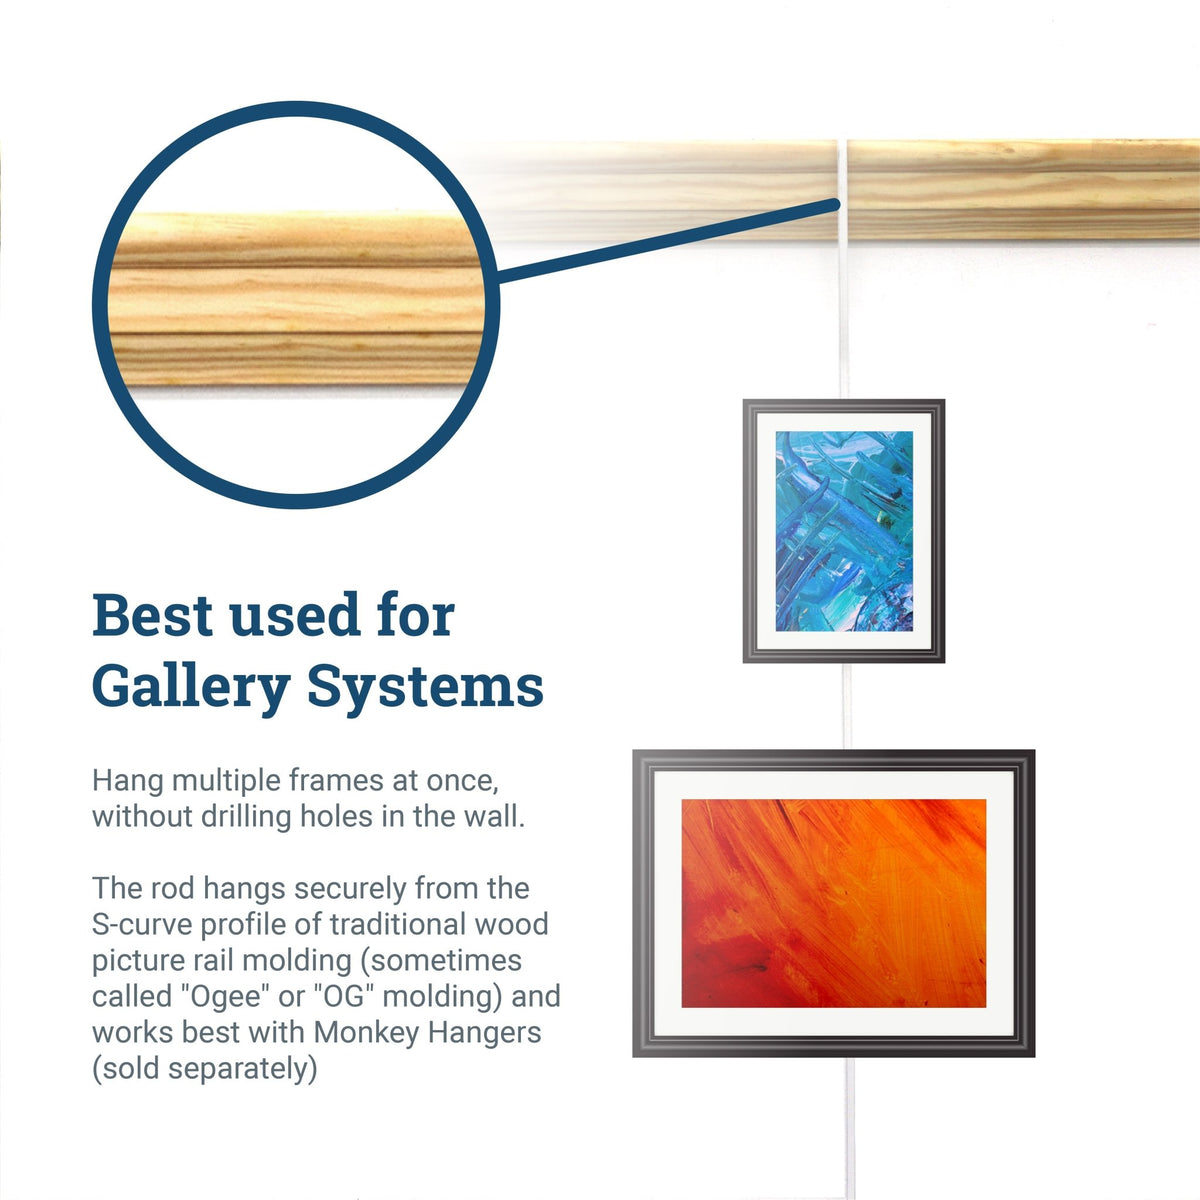 White Gallery Rod for Picture Rail Molding - 4 foot Rod for Hanging Multiple Frames and Photo Wall Collage - GS-OGRODW - Picture Hang Solutions